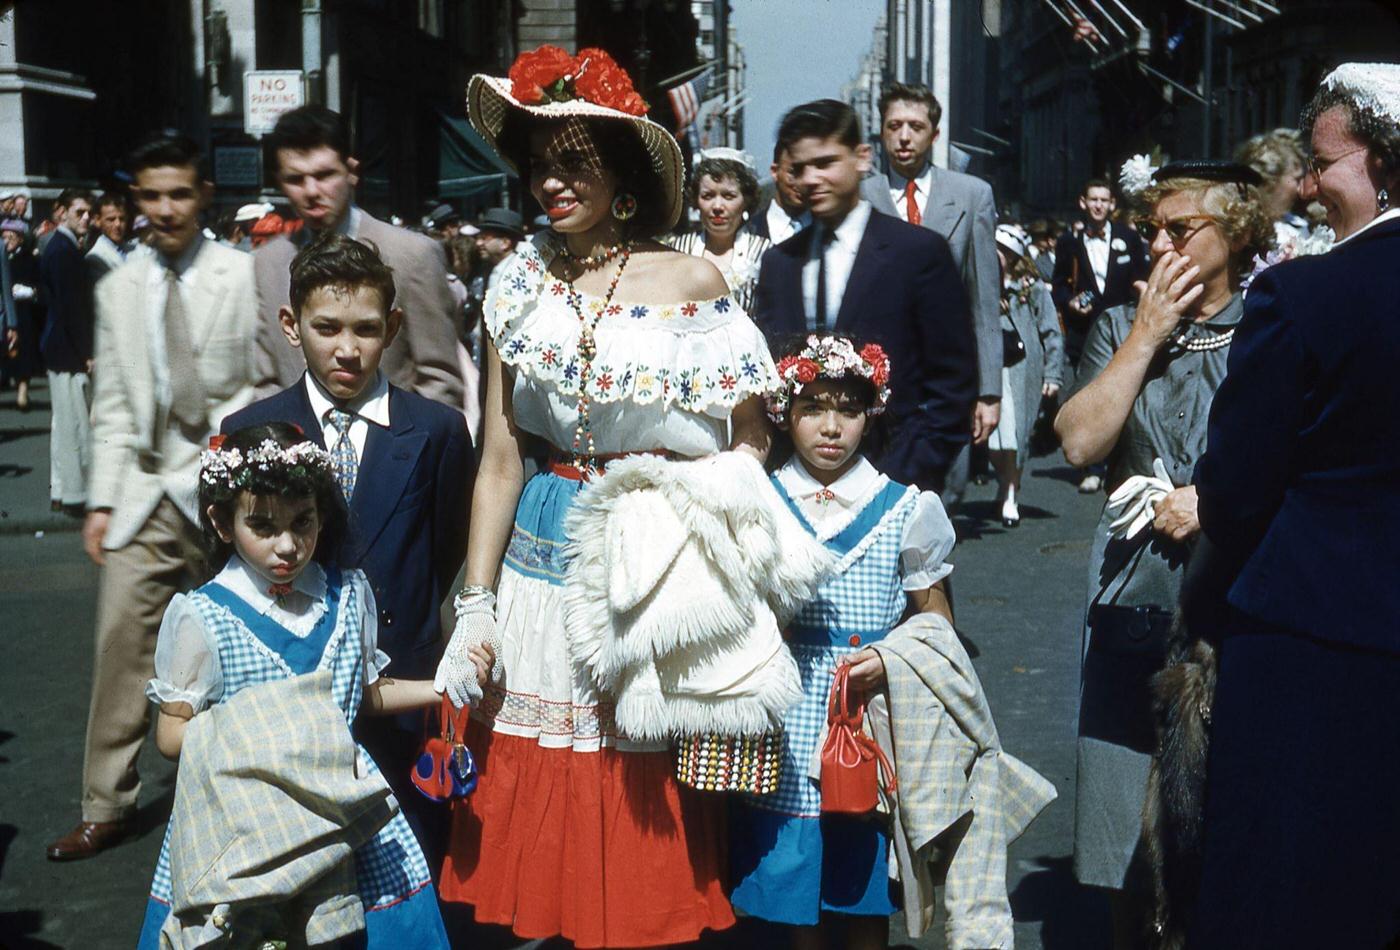 Woman And Children In &Amp;Quot;Mambo Style&Amp;Quot; Clothing At Nyc Easter Parade, Manhattan, 1955.